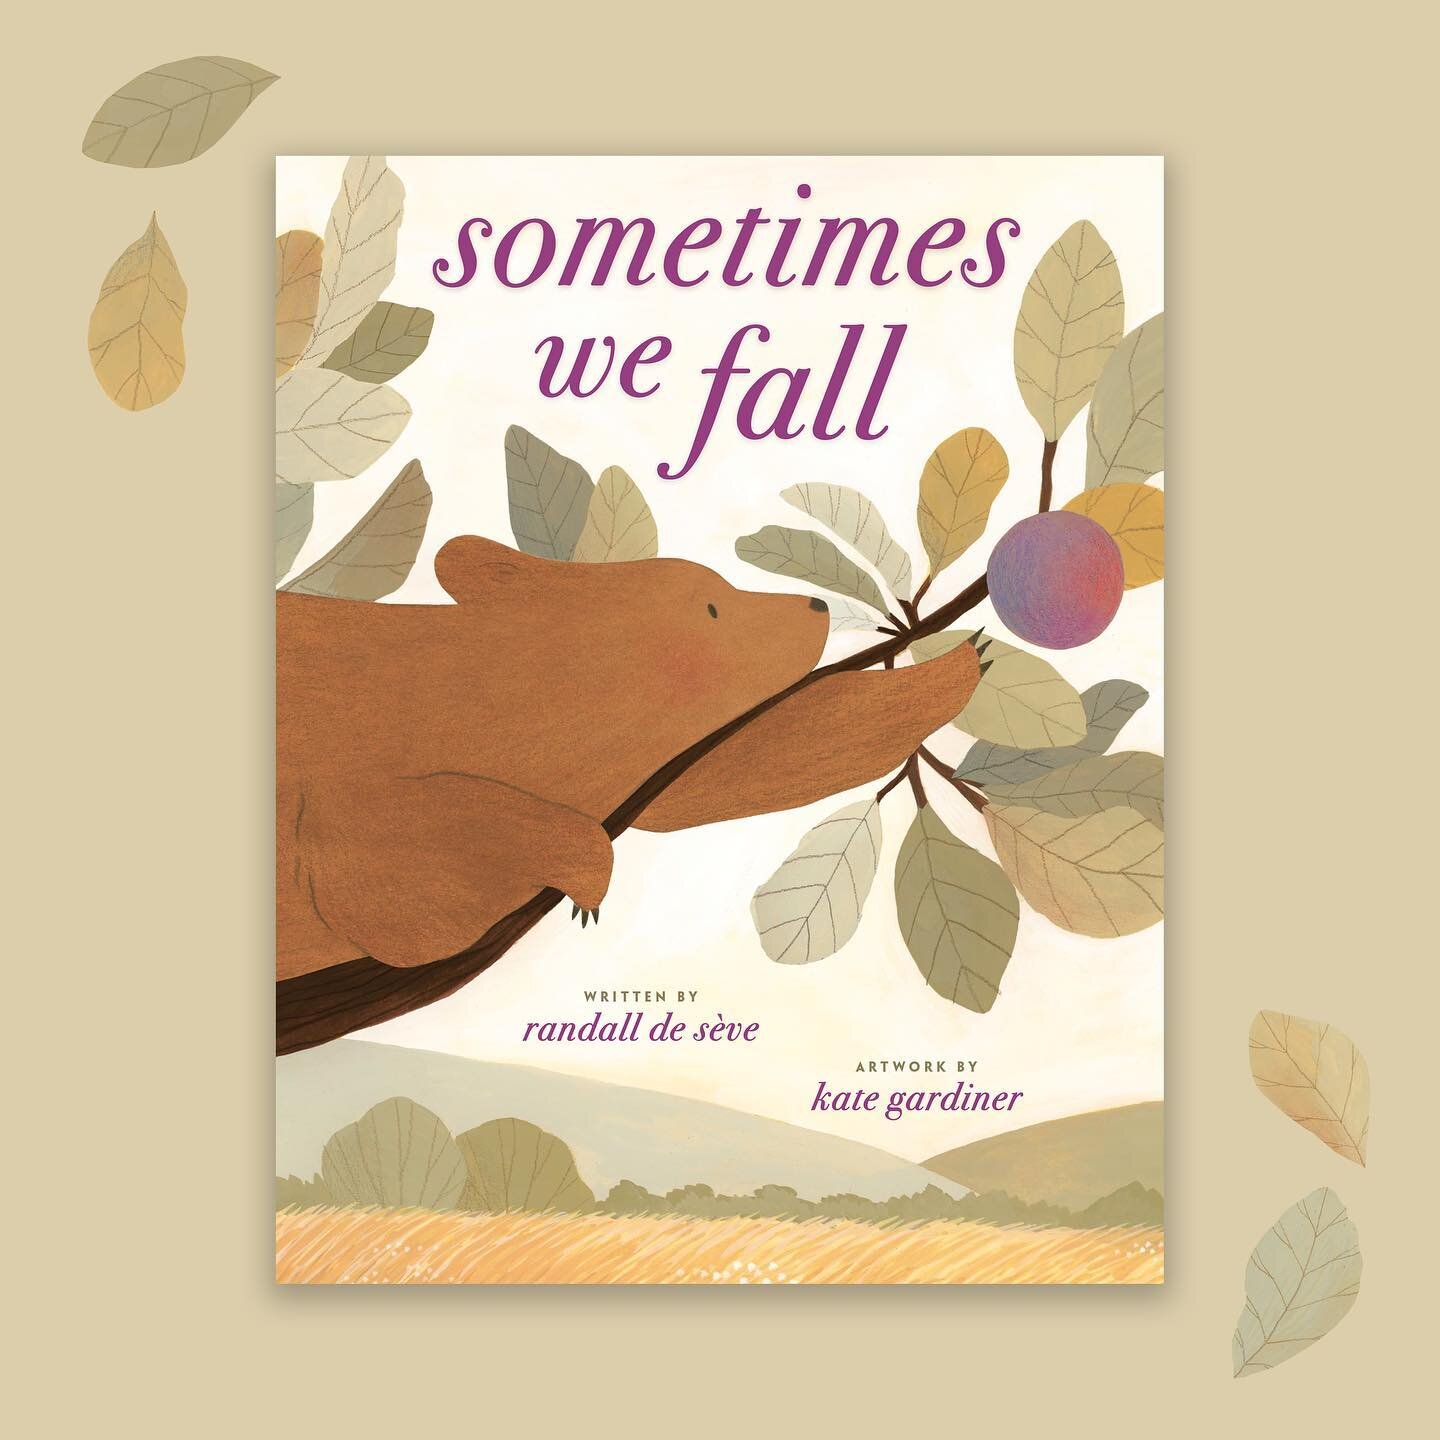 I am so excited to reveal the cover for &ldquo;Sometimes We Fall&rdquo; written by the amazing Randall de S&egrave;ve ✨available for preorder now, link in my bio ✨This book has truly been such a pleasure to work on. Thank you so much to my wonderful 